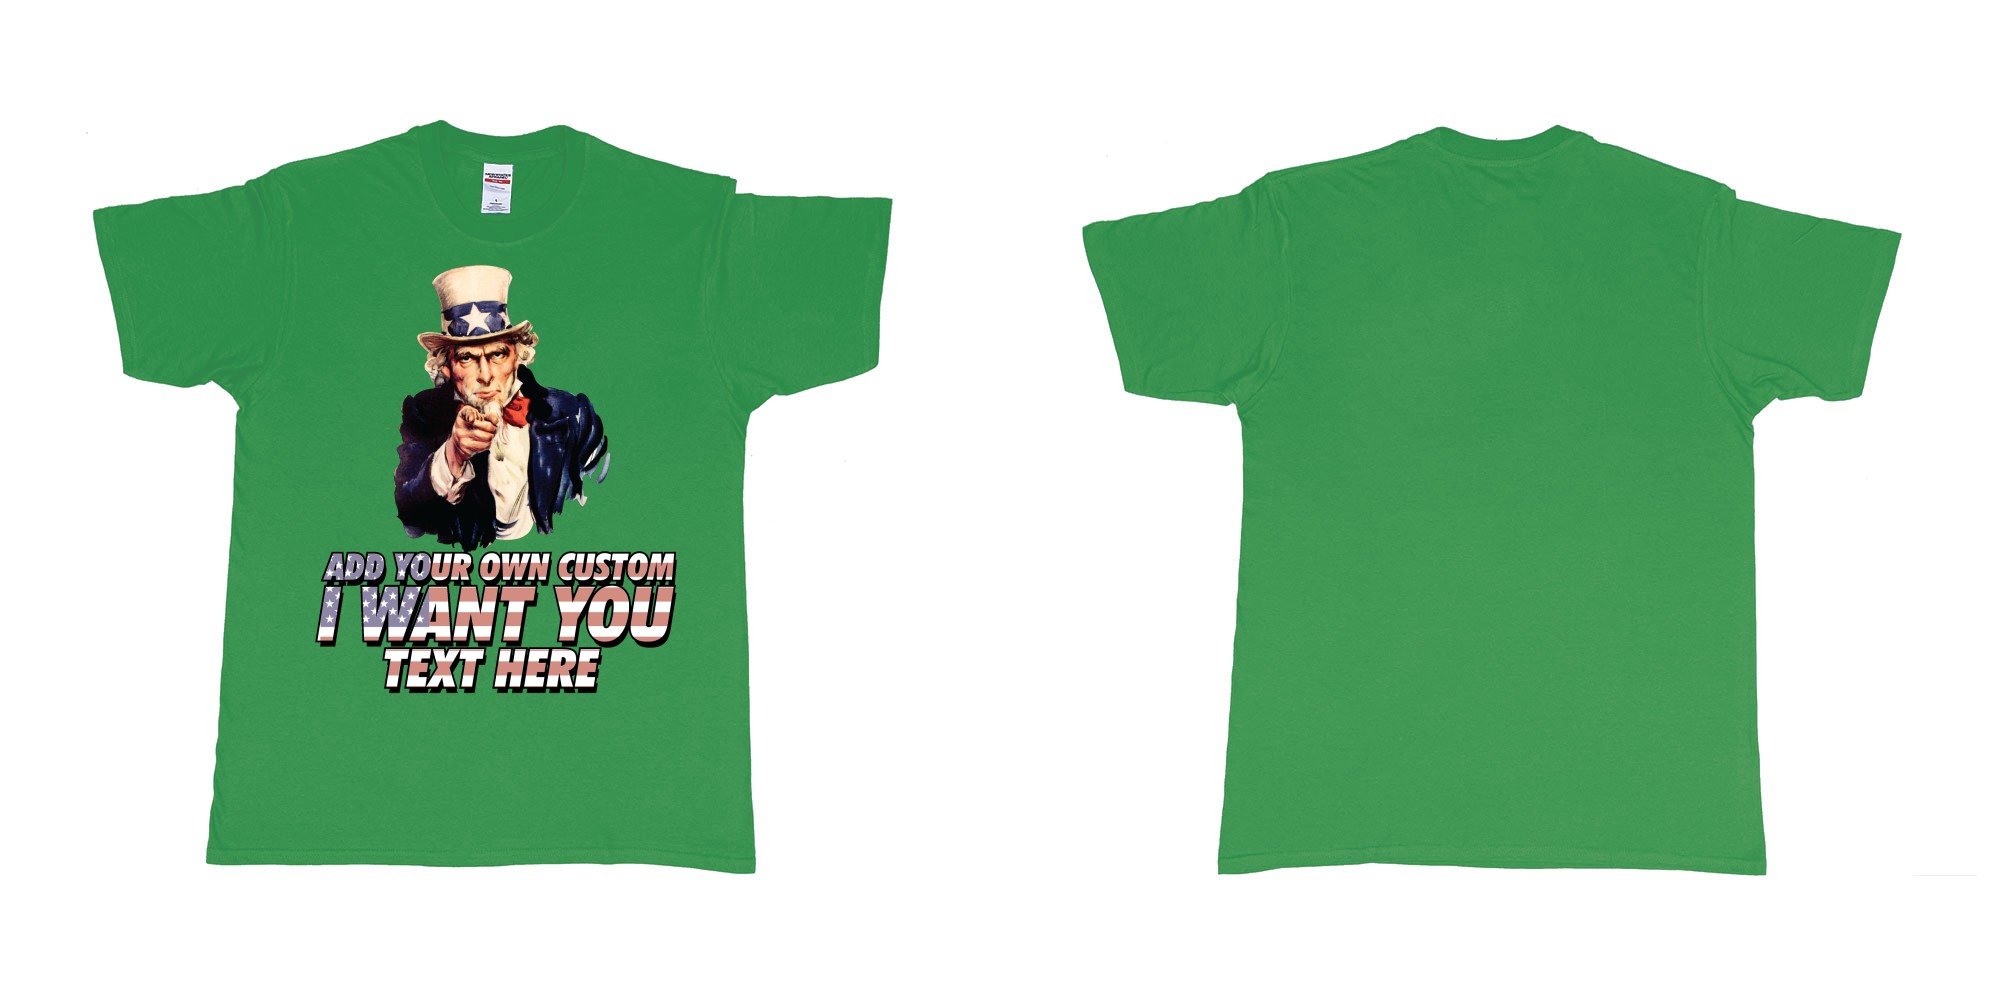 Custom tshirt design uncle sam i want you custom design own printing in fabric color irish-green choice your own text made in Bali by The Pirate Way